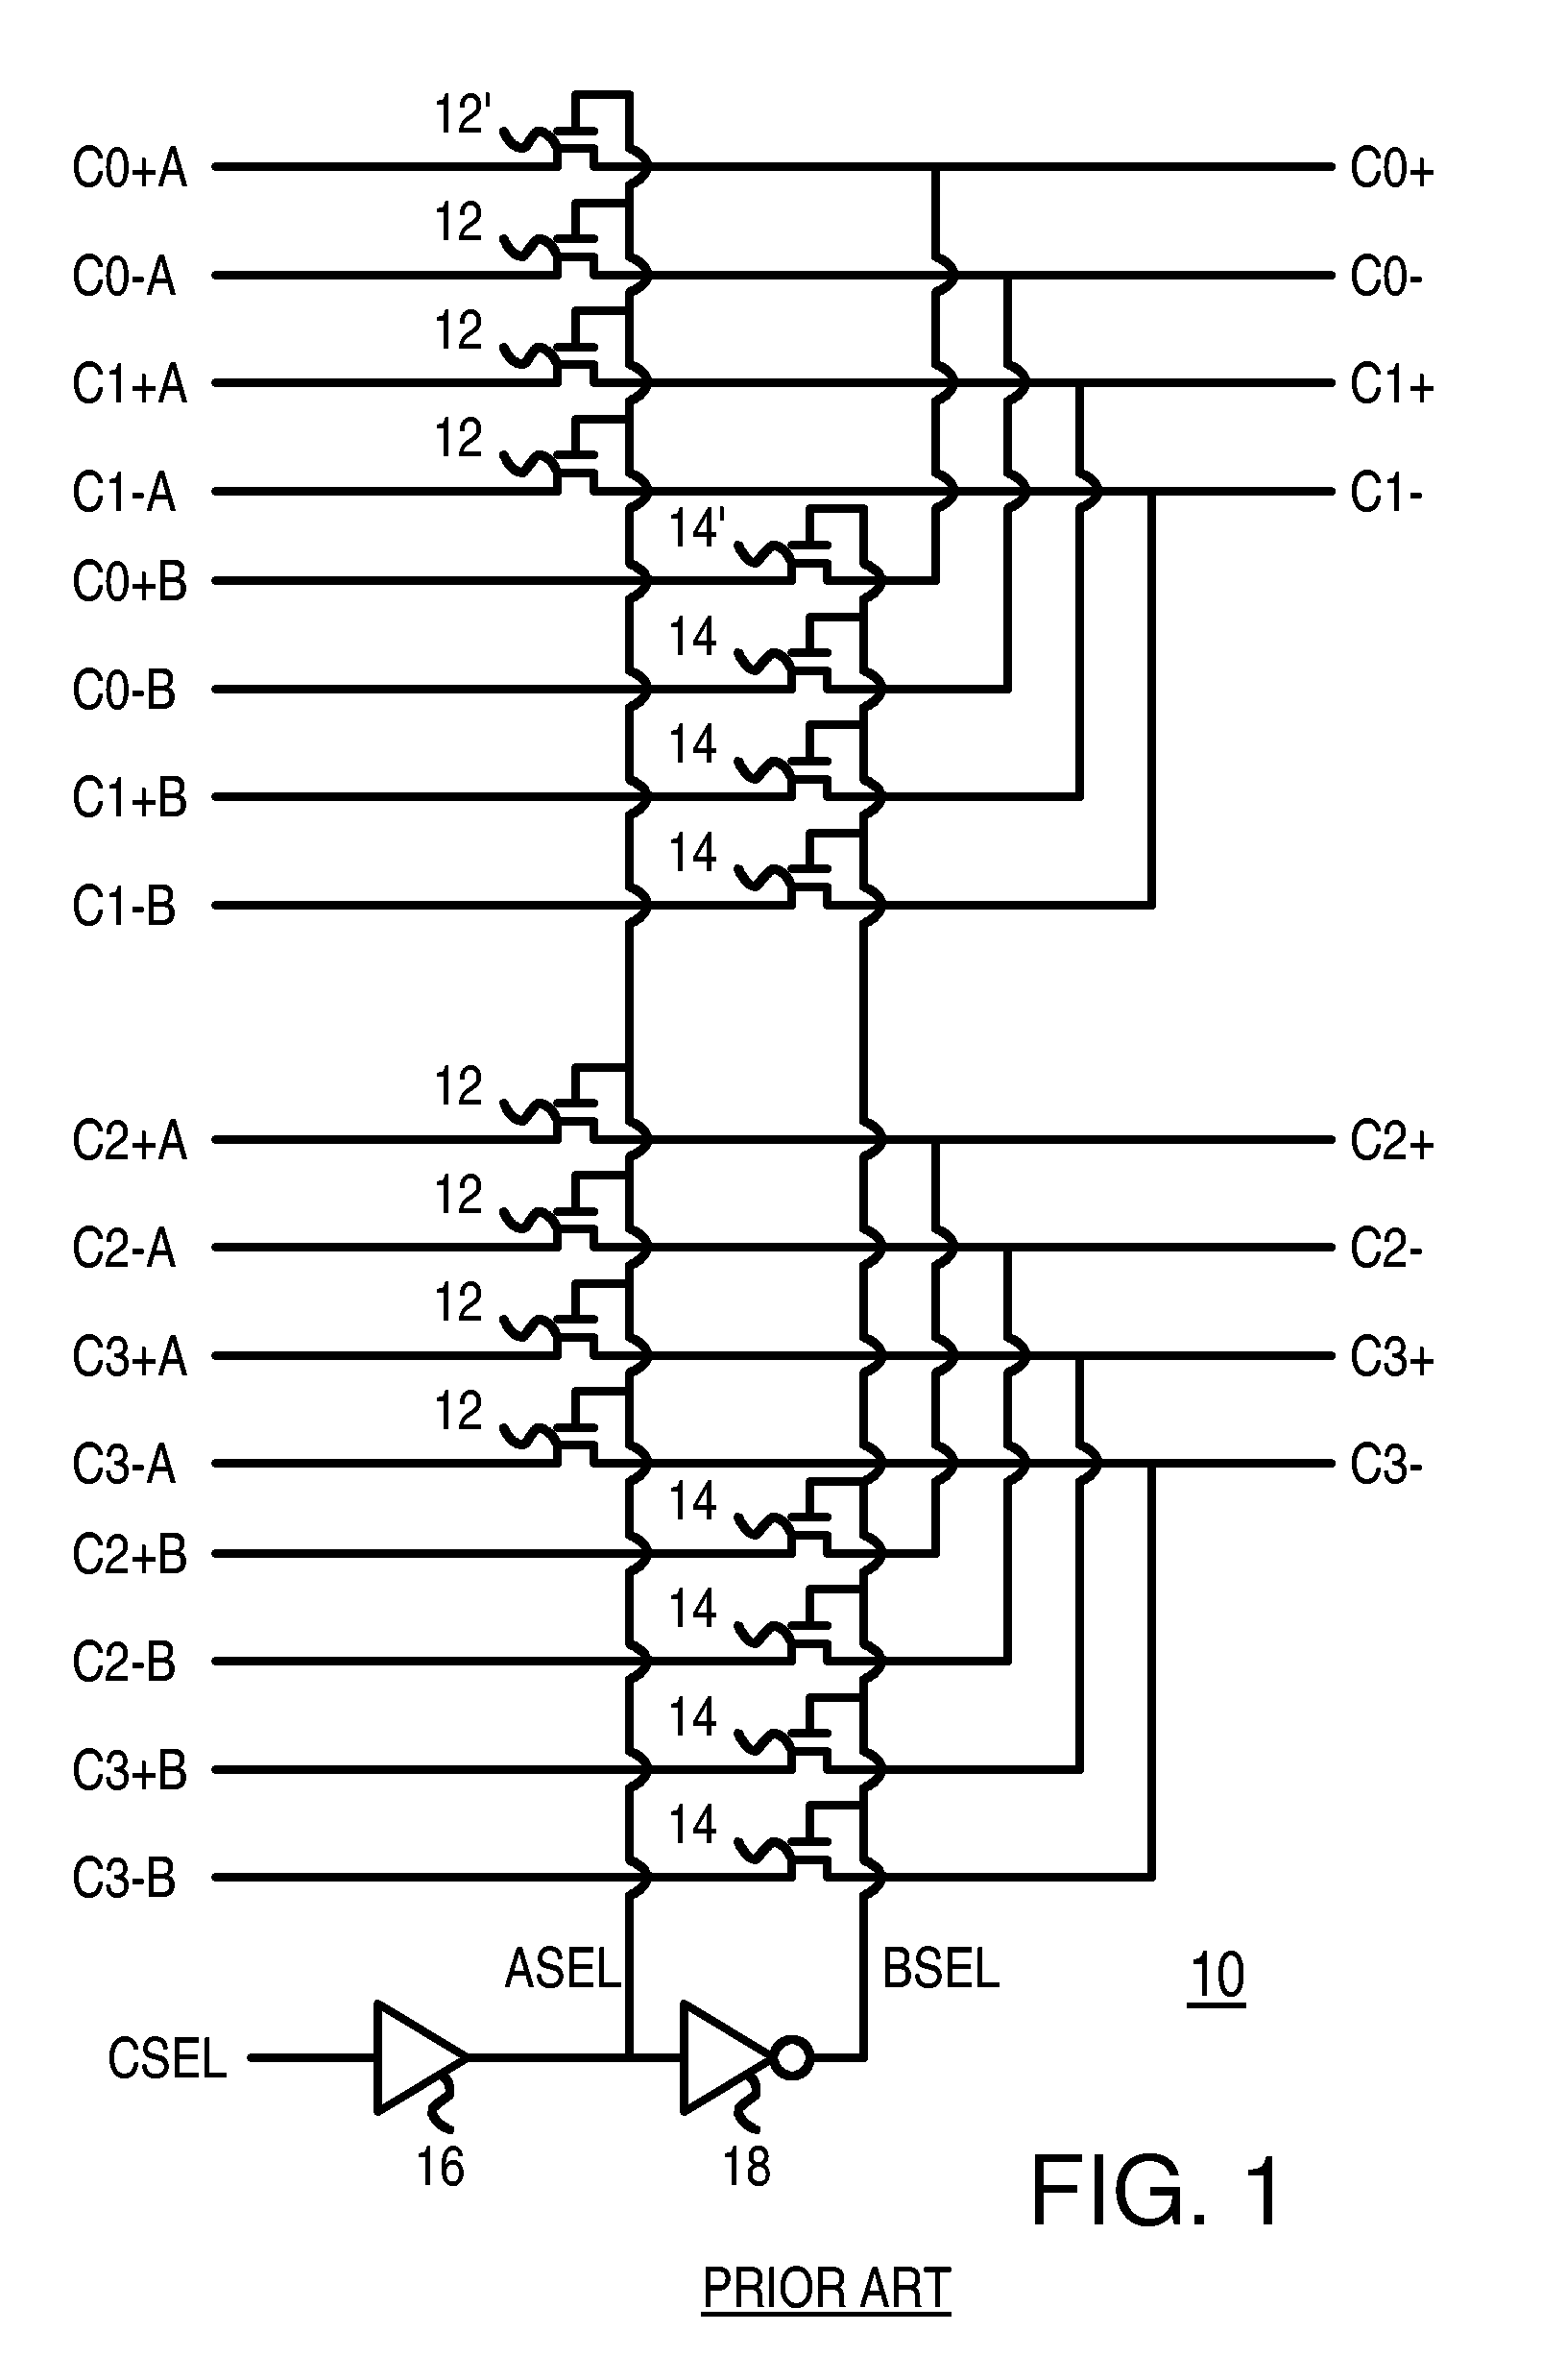 Visual or multimedia interface bus switch with level-shifted ground and input protection against non-compliant transmission-minimized differential signaling (TMDS) transmitter